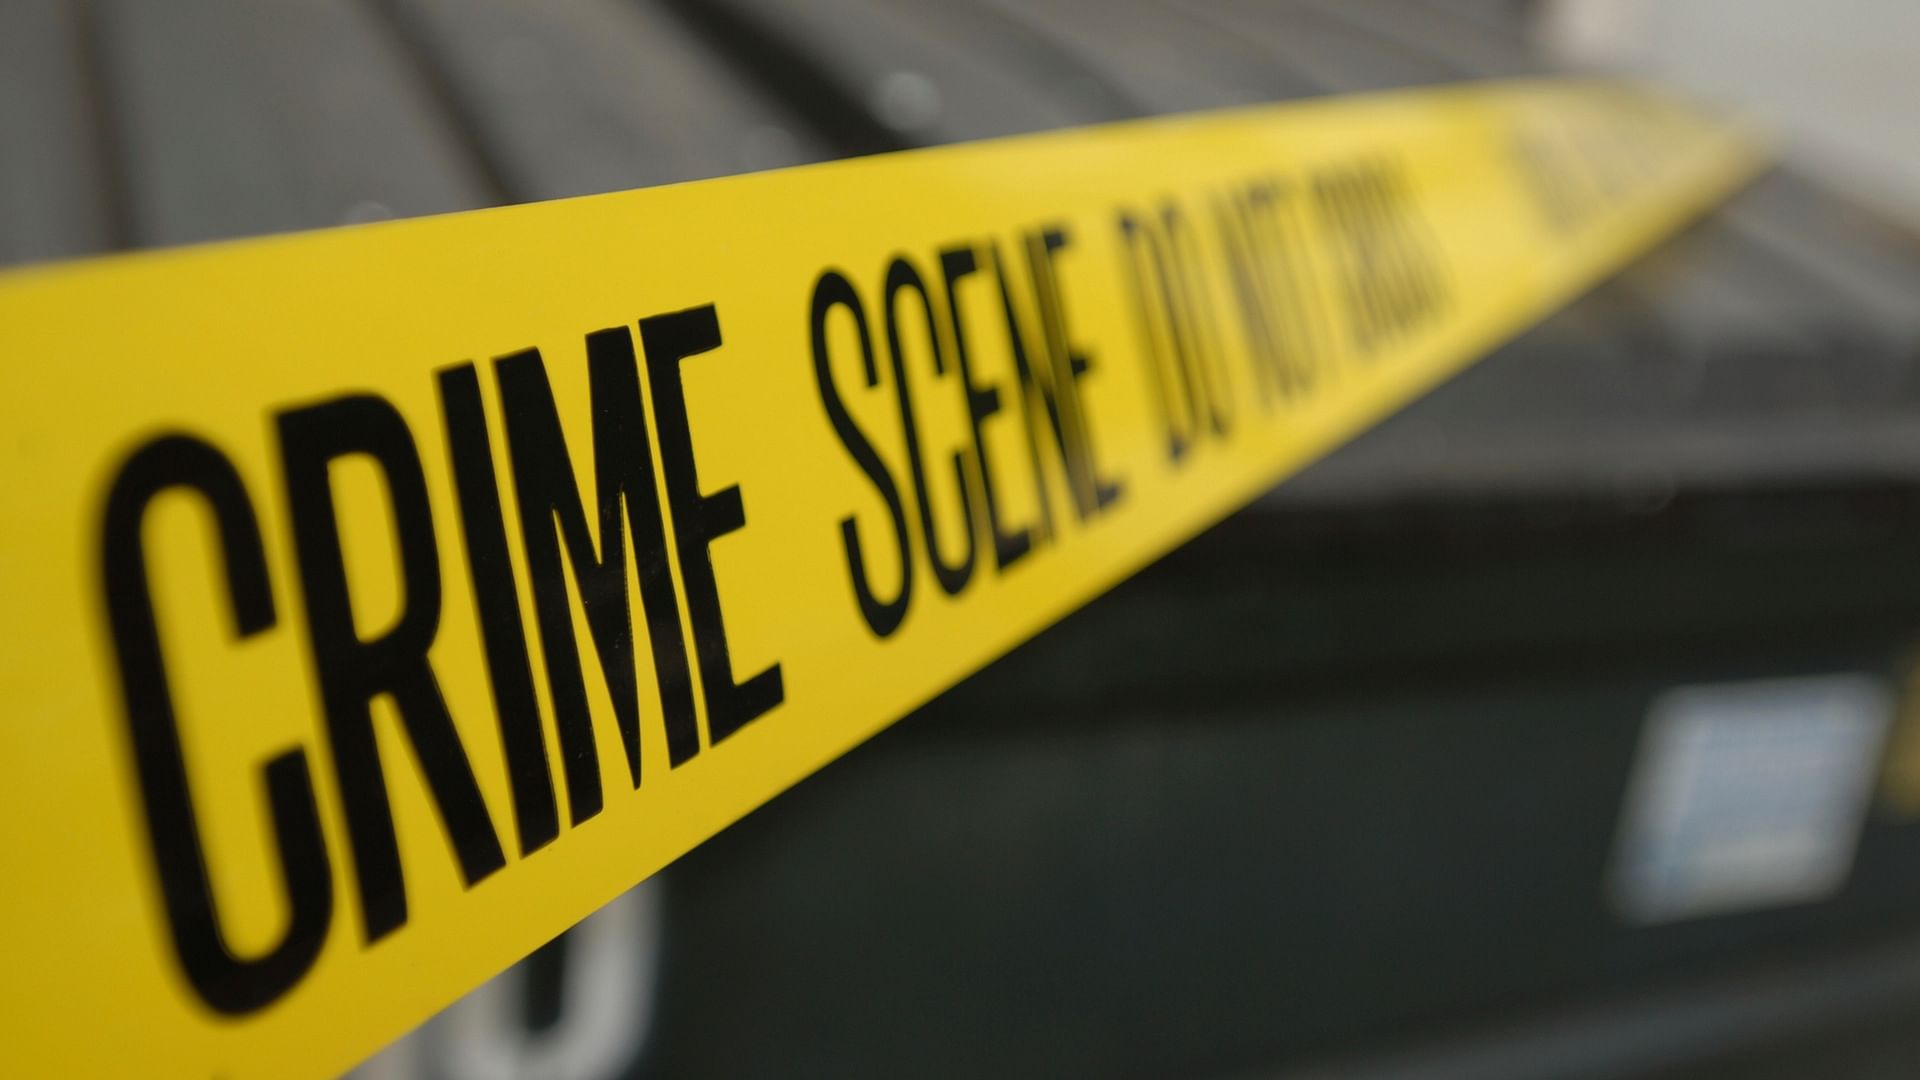 The victim has been found dead in the early hours of Tuesday. (Photo: For Representational Purposes Only) (Photo: iStock)